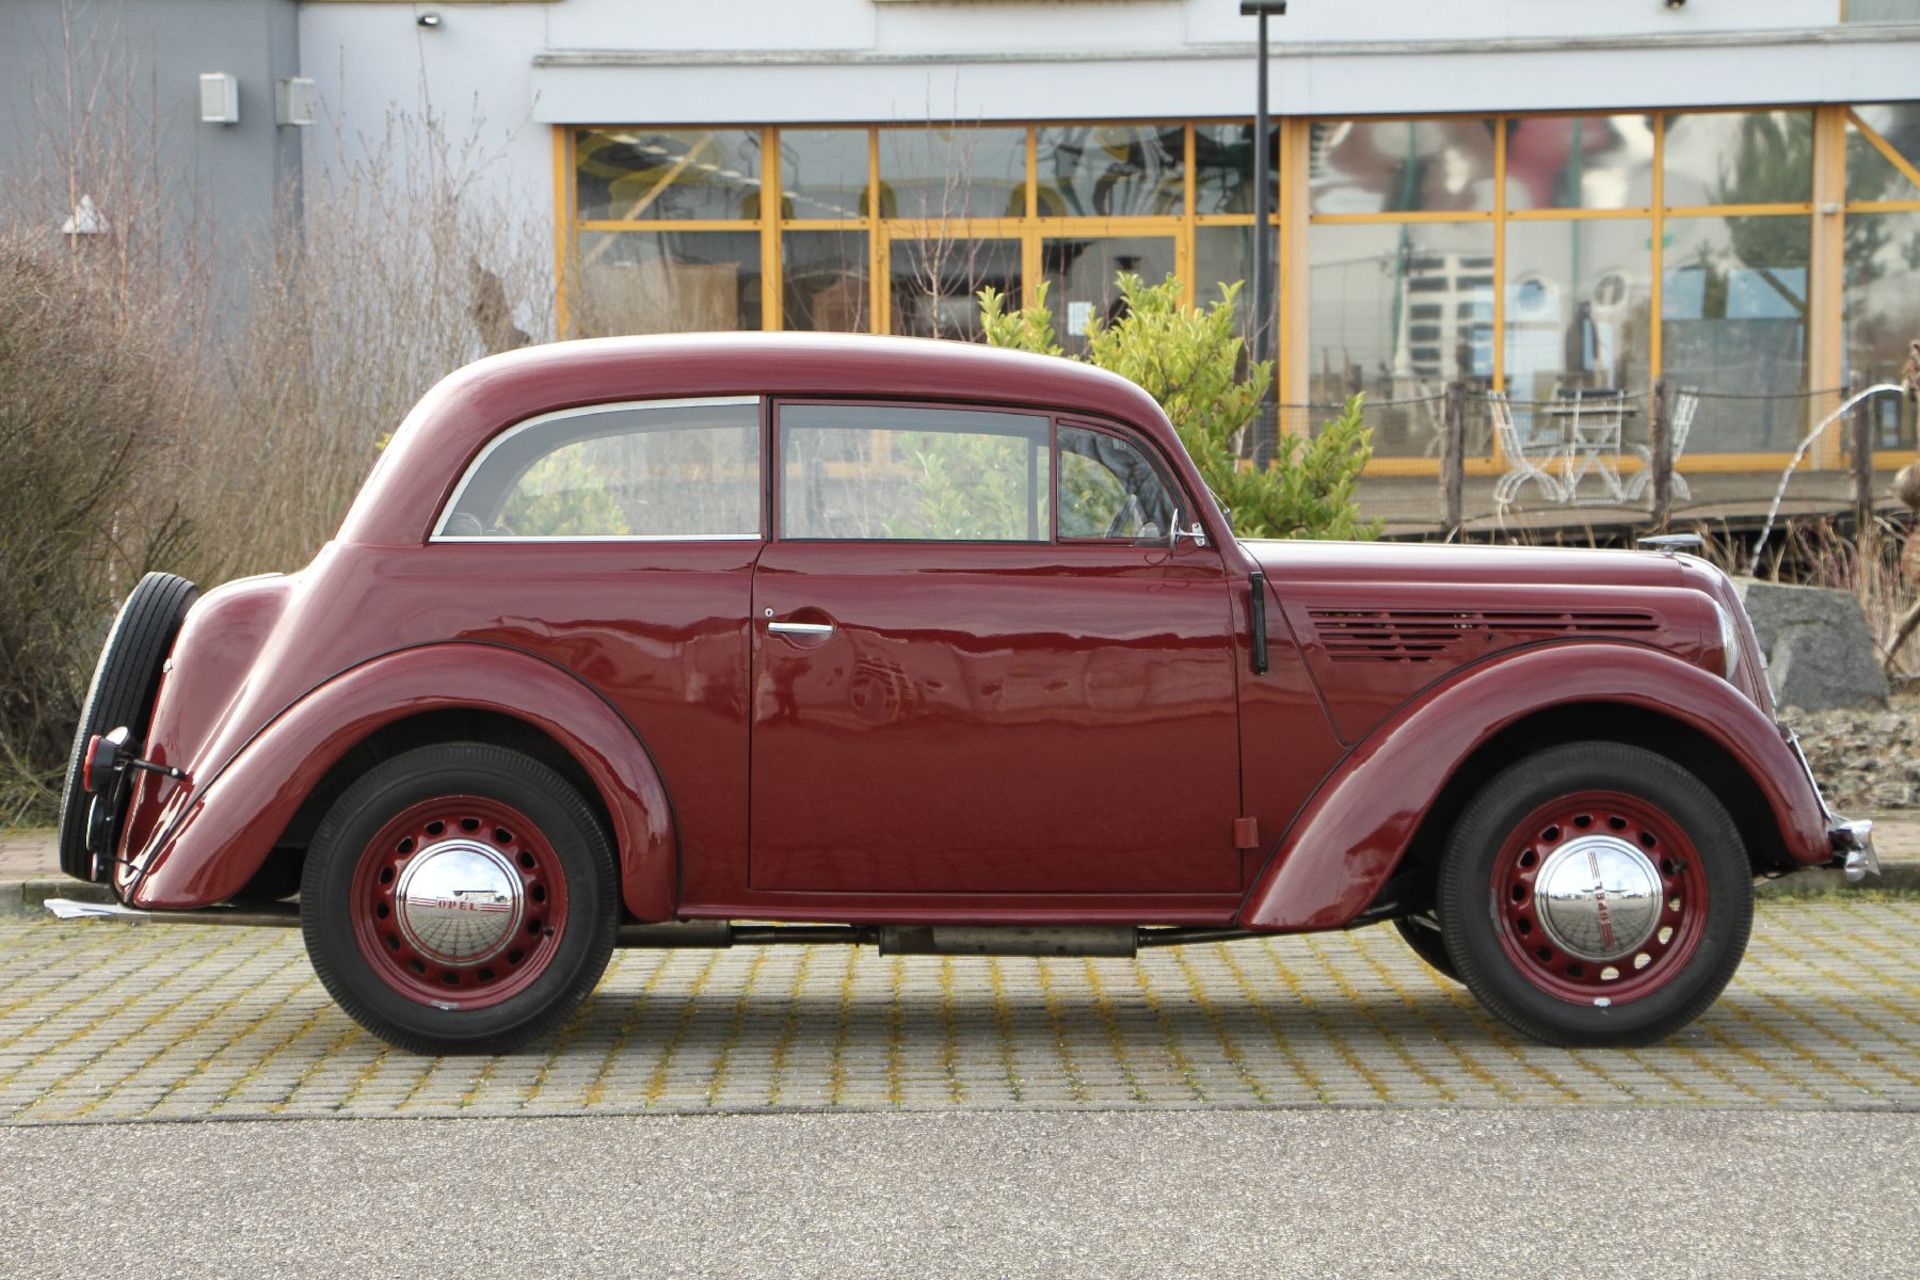 Opel Kadett, Chassis Number: 23410411, first registered 07/1937, 3. owners, mileage 27.658 km - Bild 3 aus 10